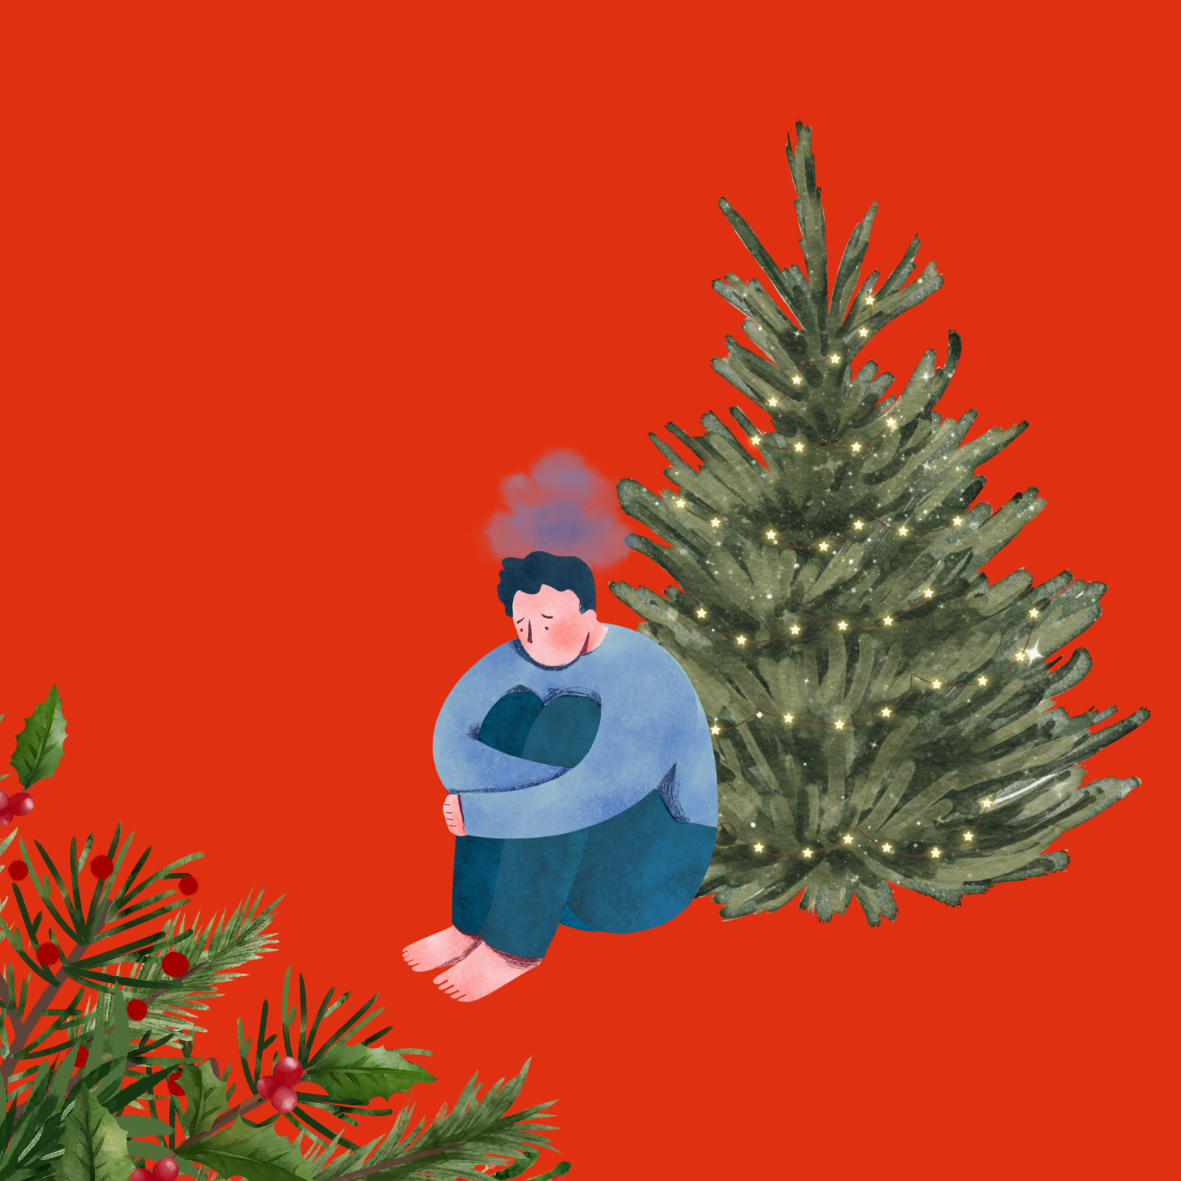 A graphic cartoon image of a person in a blue jumper, looking sad and hugging their knees, sat by a Christmas tree. Over their head is a small grey cloud.